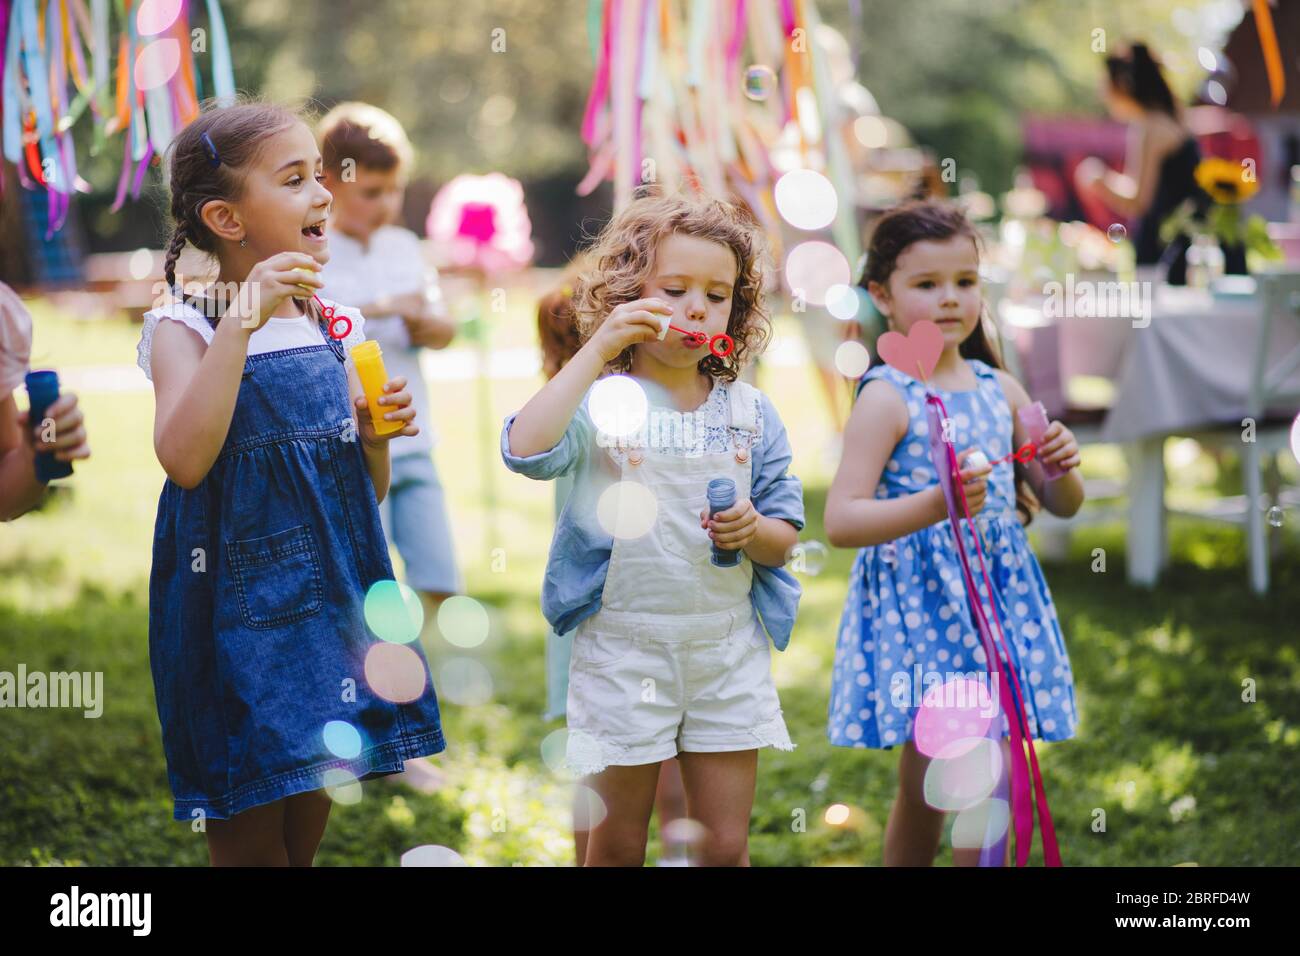 Small children outdoors in garden in summer, playing with bubbles. Stock Photo